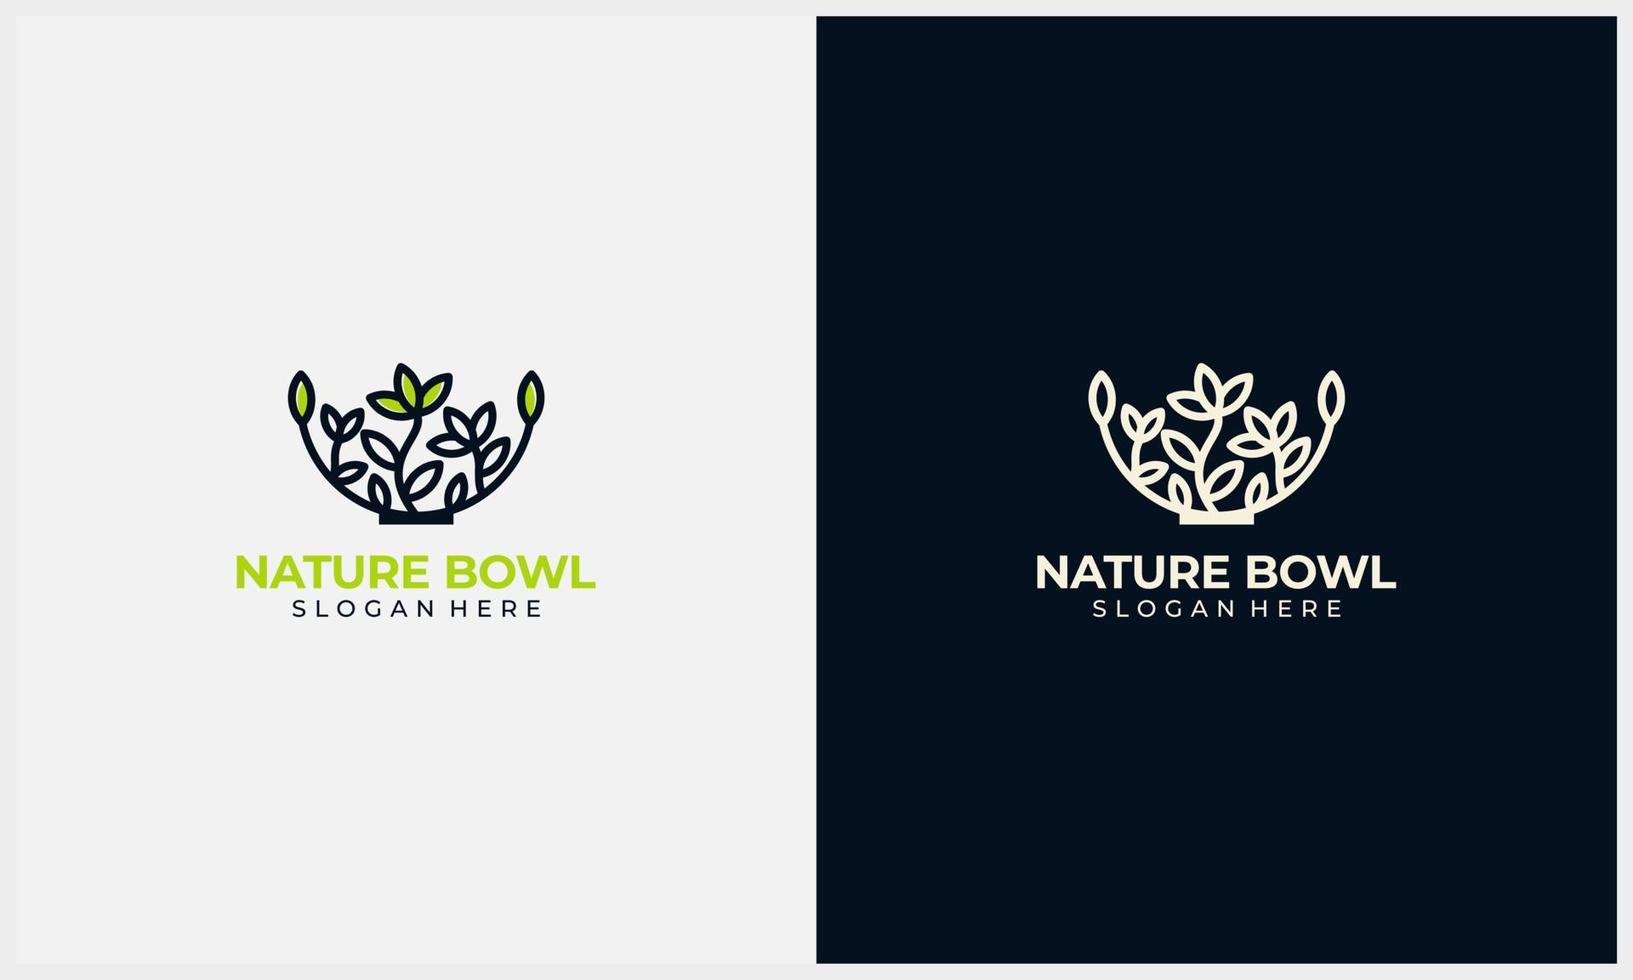 healthy food logo with nature vegetable symbol and bowl icon logo template vector